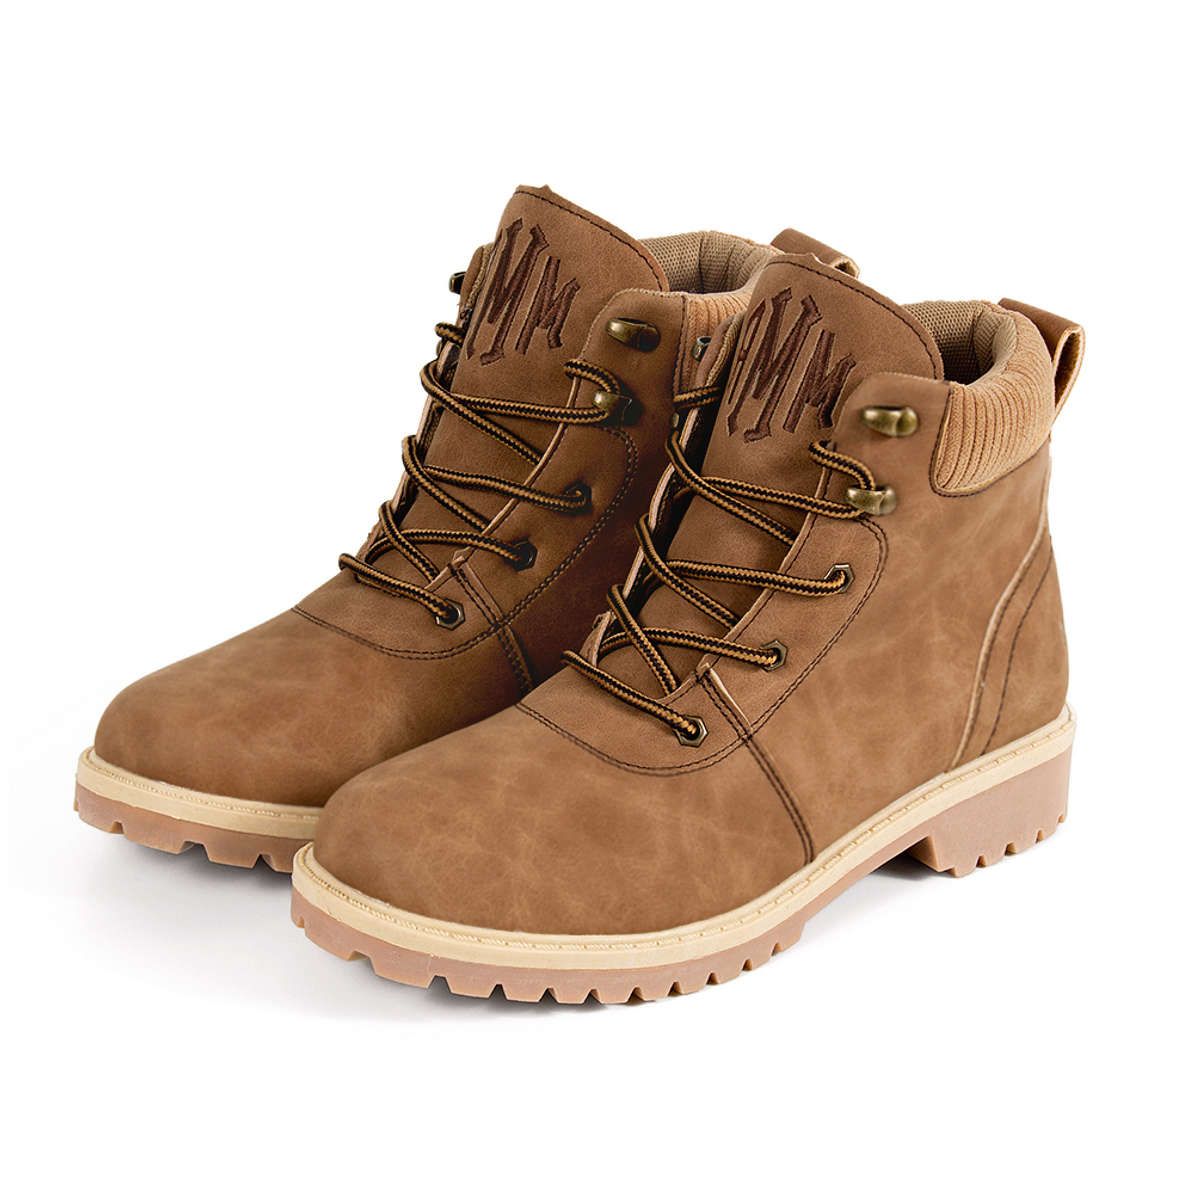 Monogrammed Hiking Boots | Marleylilly